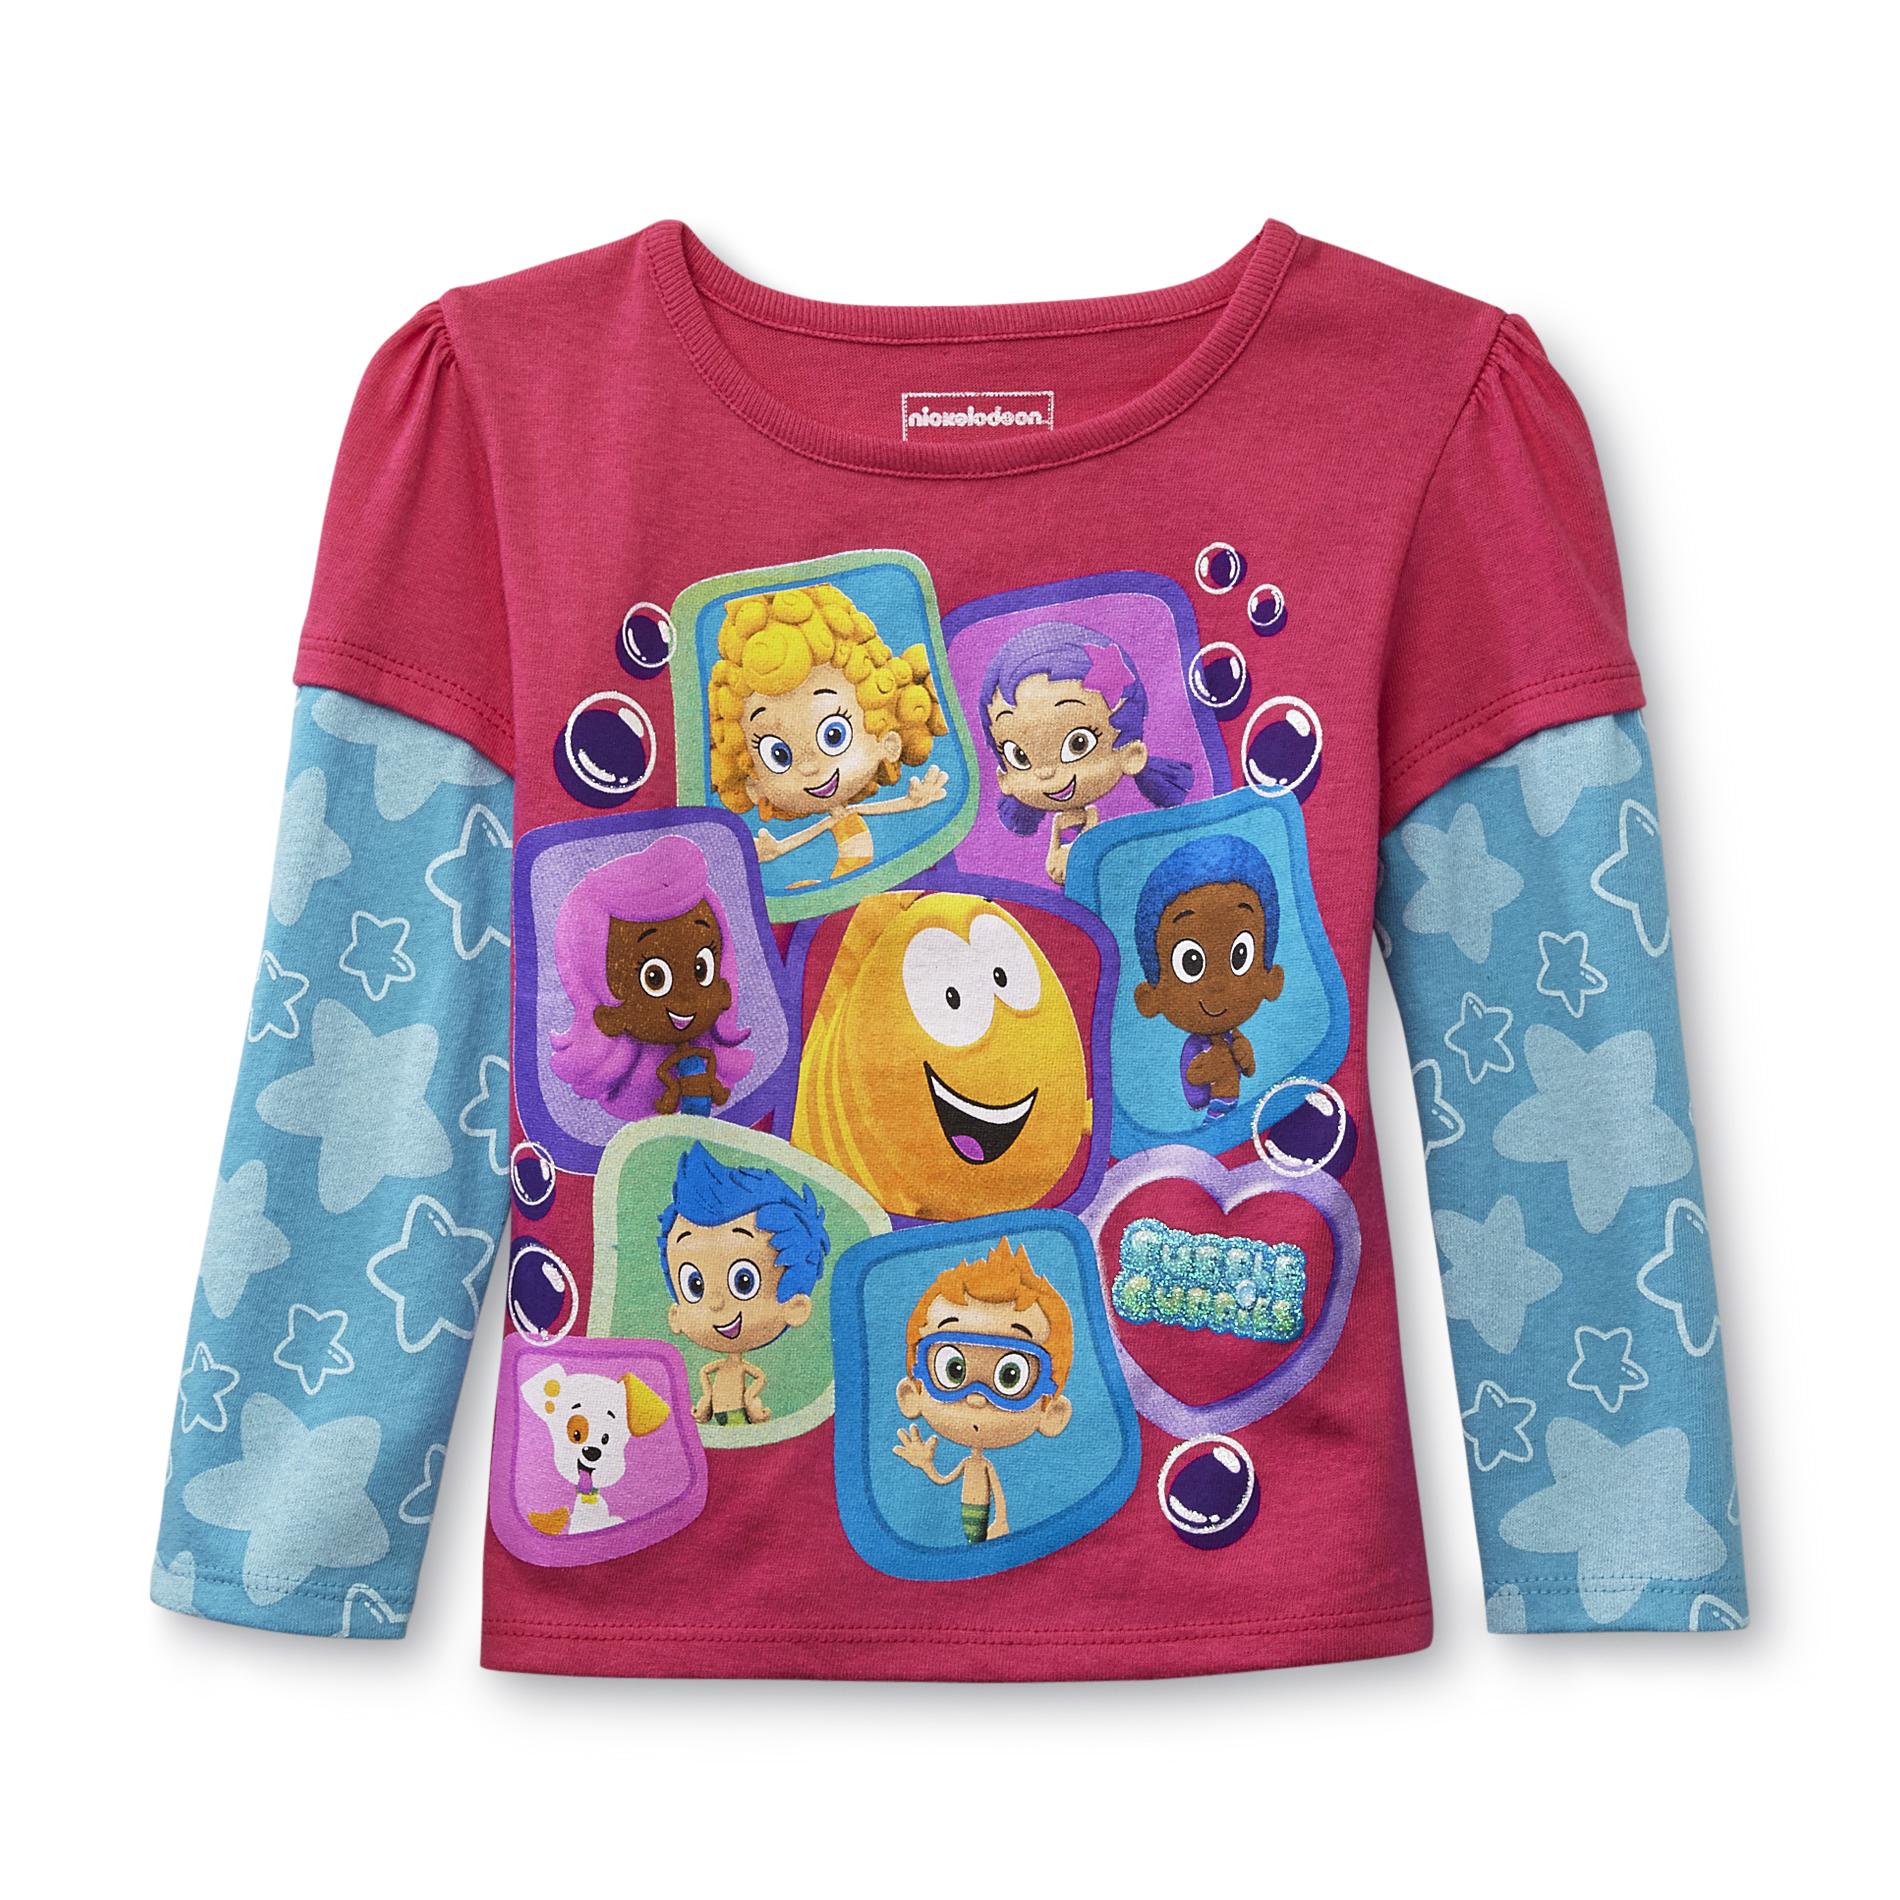 Nickelodeon Bubble Guppies Toddler Girl's Graphic T-Shirt